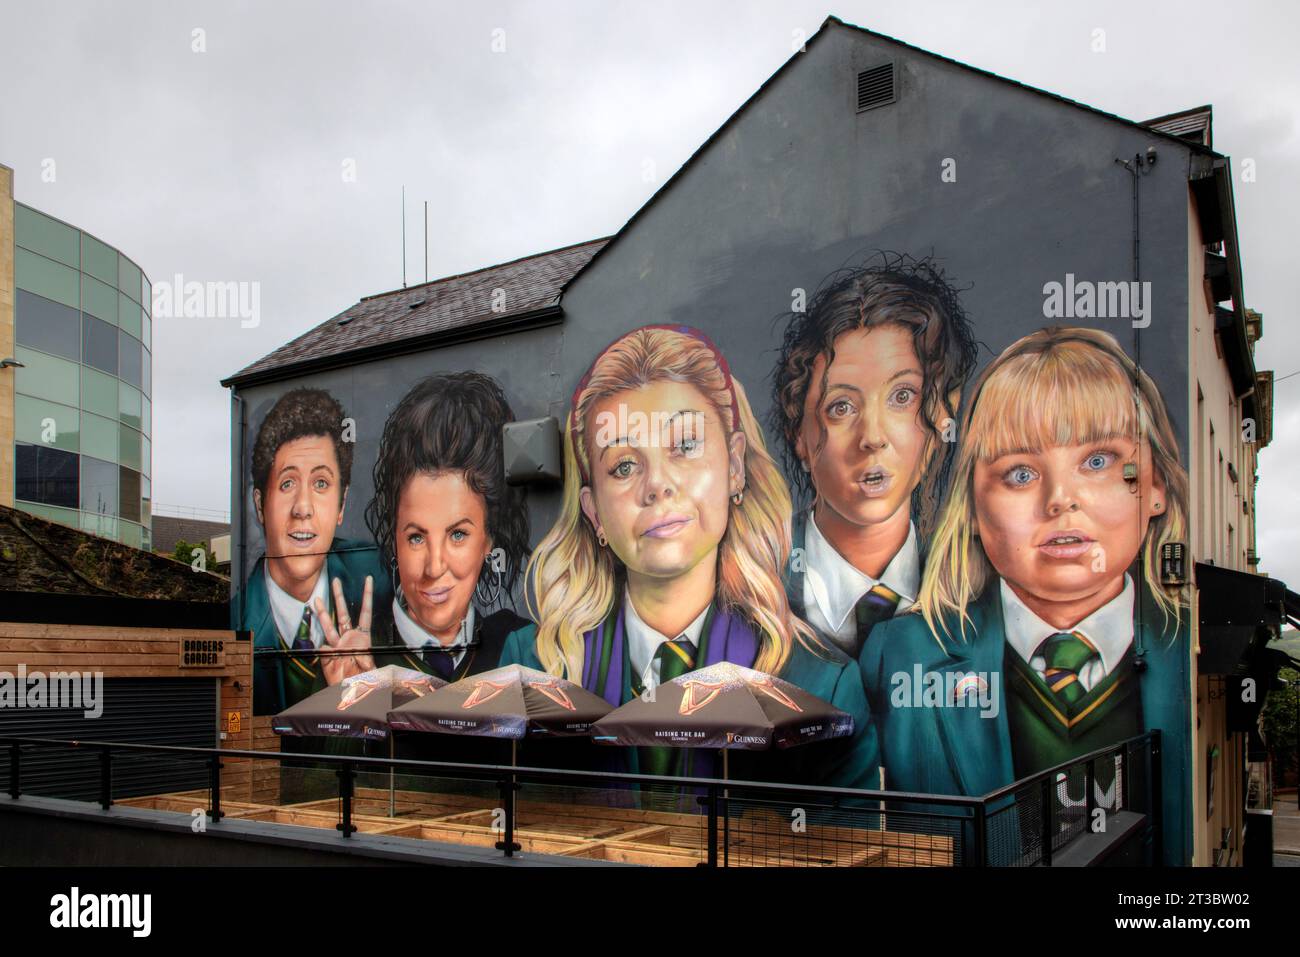 Mural of the Derry Girls in Londonderry, Northern Ireland Stock Photo